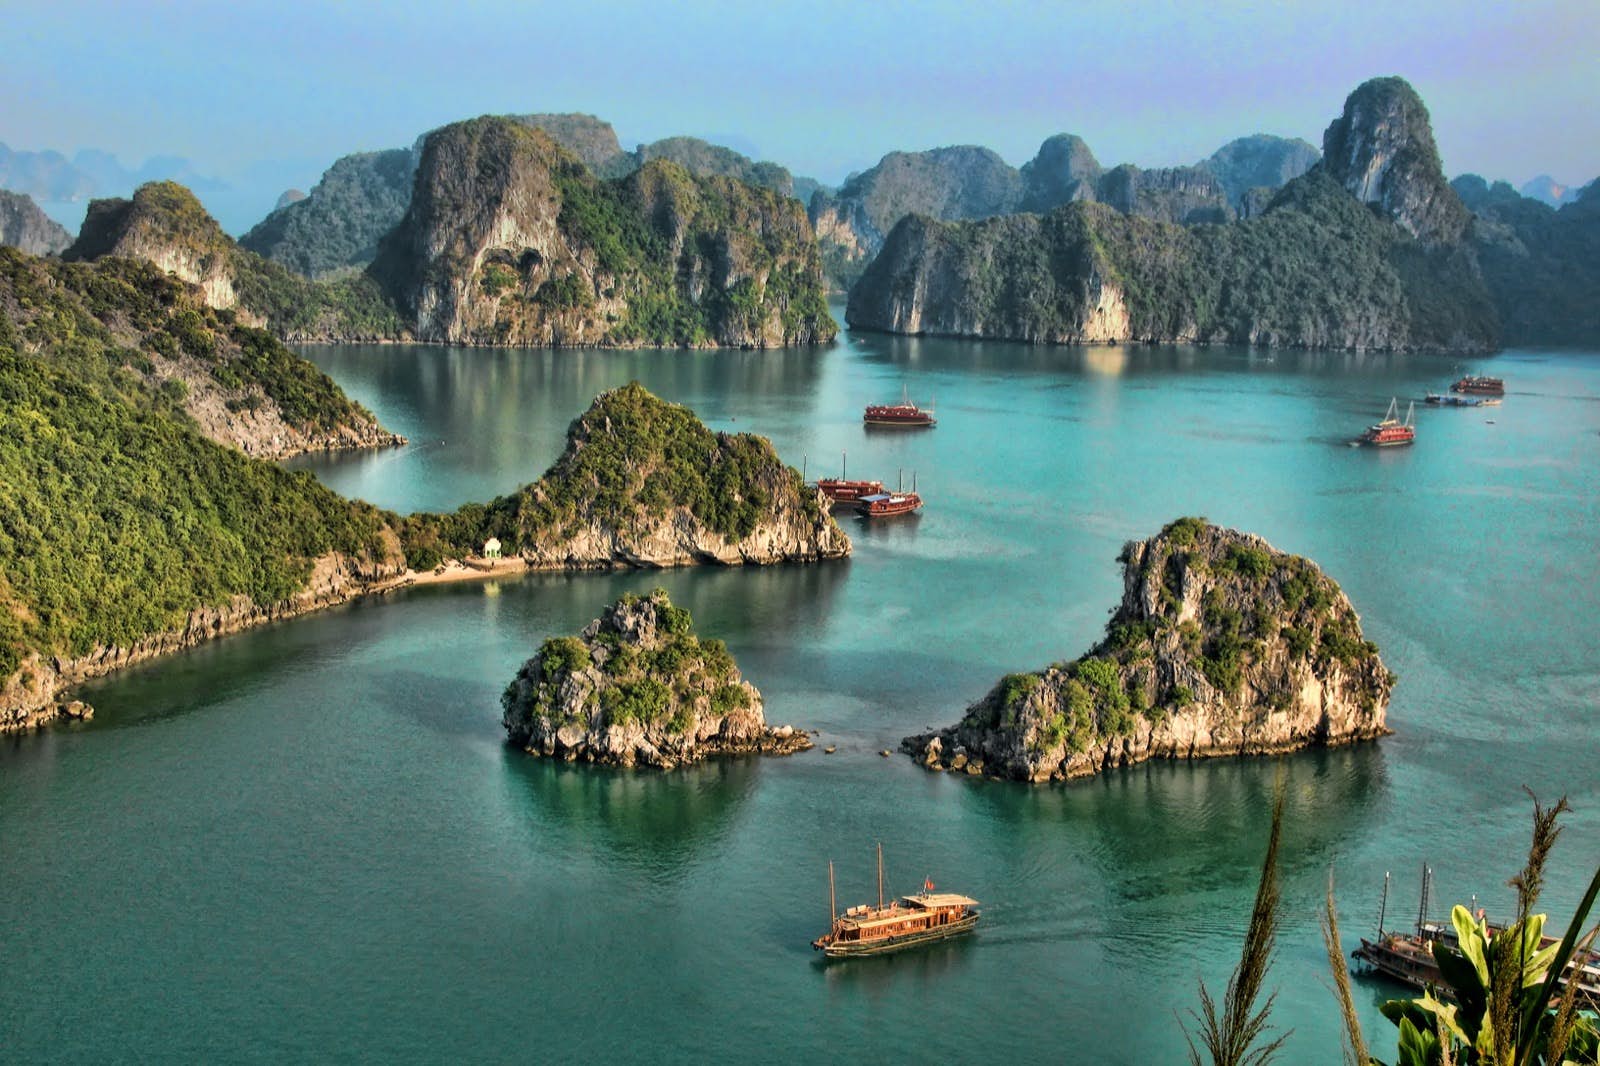 Can You Pass This 40-Question Geography Test That Gets Progressively Harder With Each Question? Hạ Long Bay, Halong Bay, Vietnam